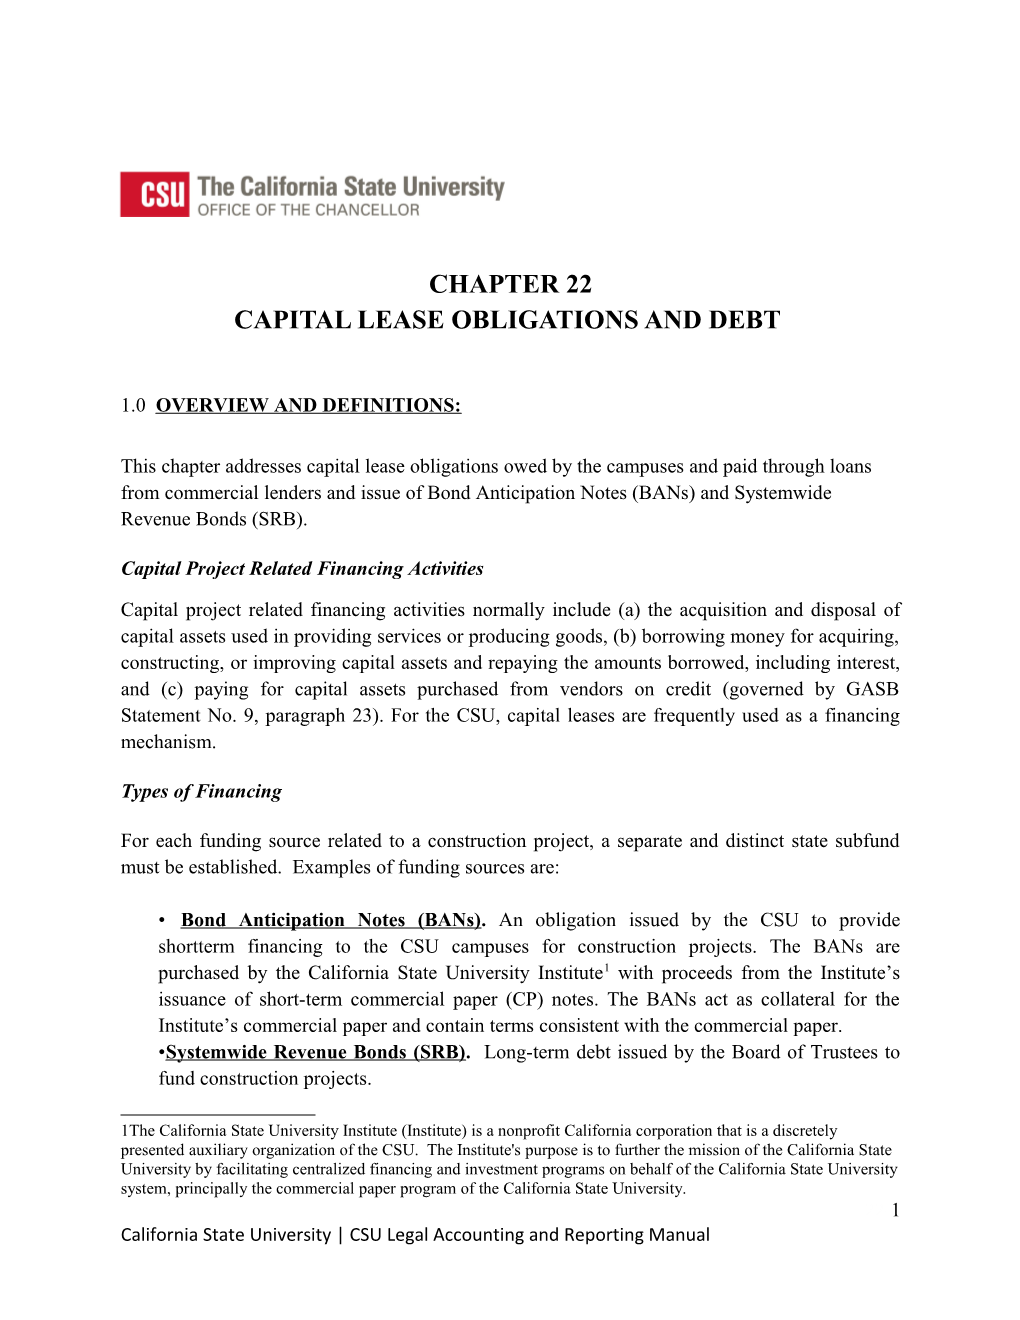 Capital Lease Obligations and Debt